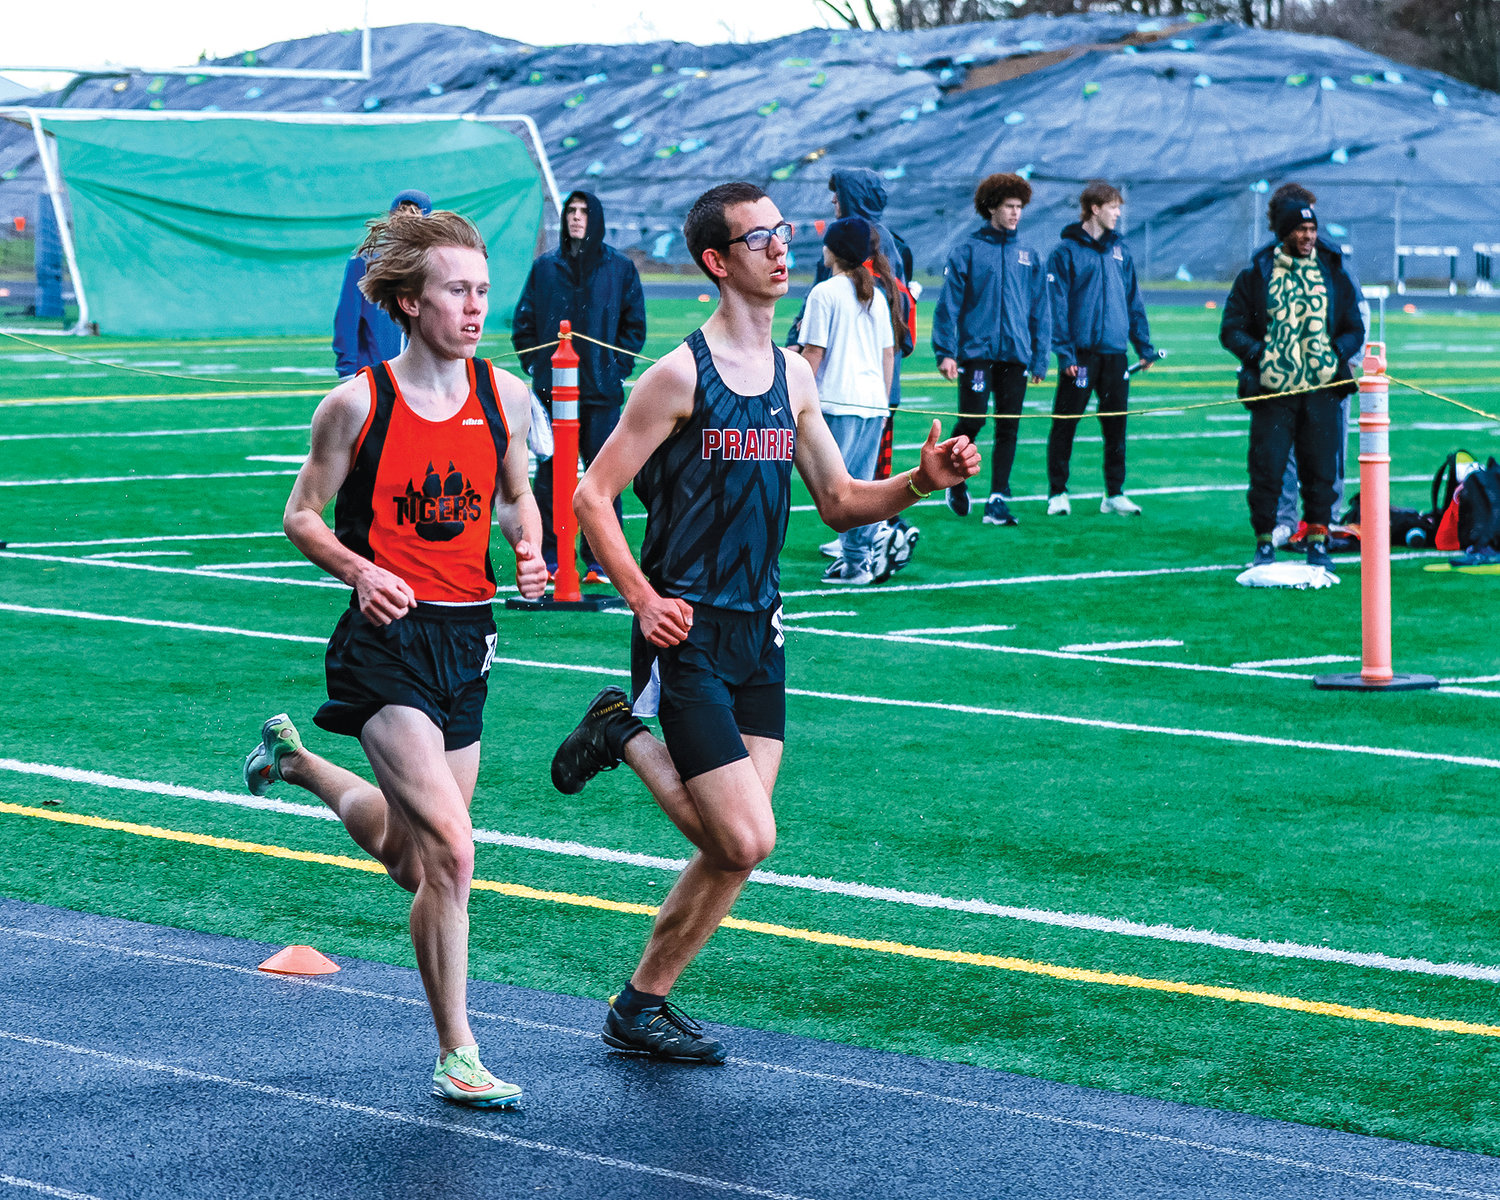 Battle Ground's Caden Ashworth runs alongside Prairie's Spencer Hoyt during the 3200-meter race at the Tiger Invite at Battle Ground High School on Saturday, March 25.